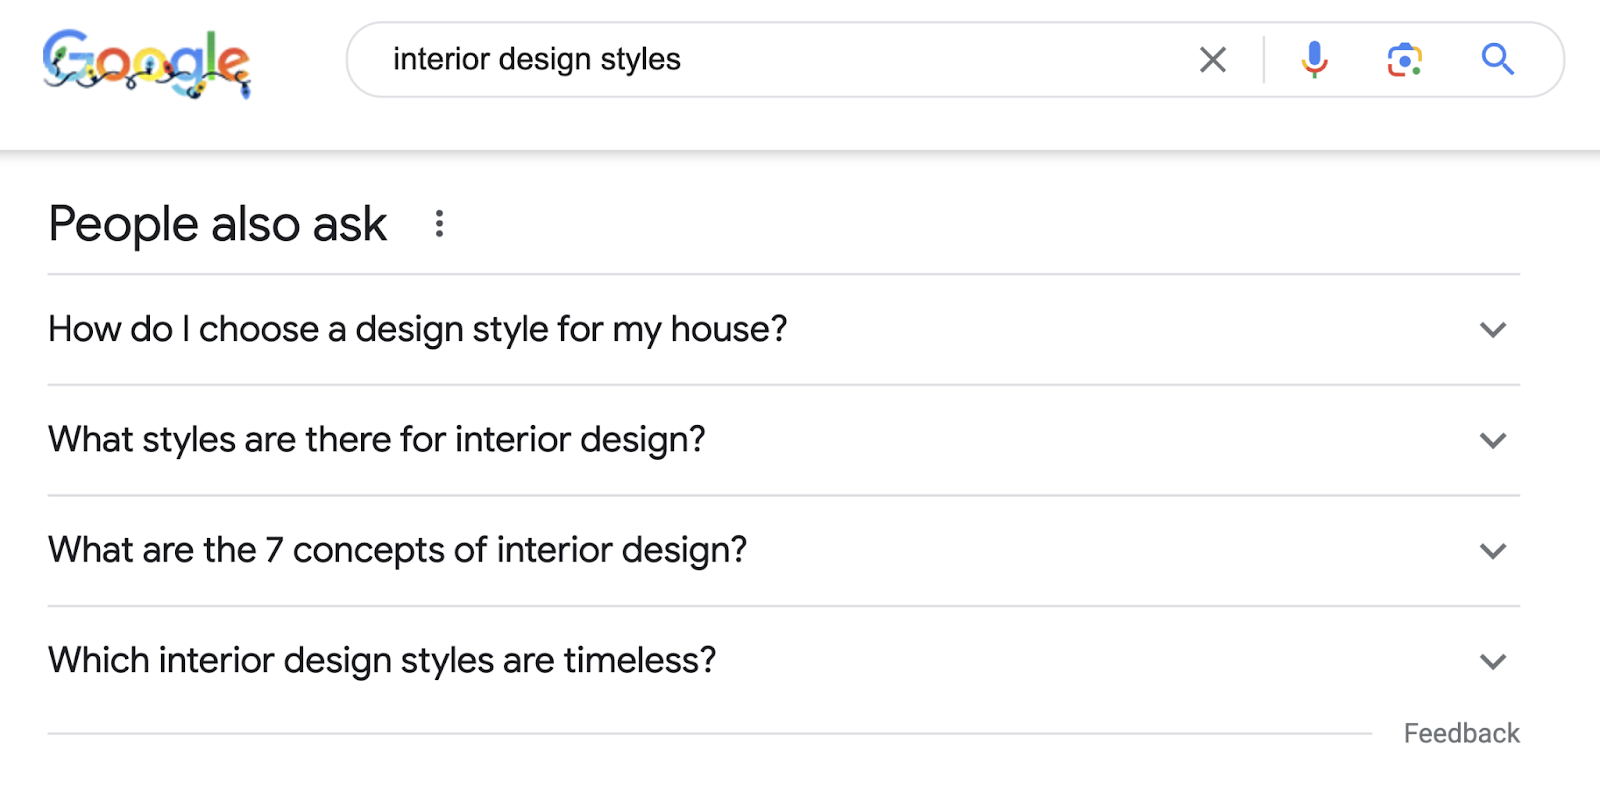 Google’s People Also Ask section for "interior design styles" query